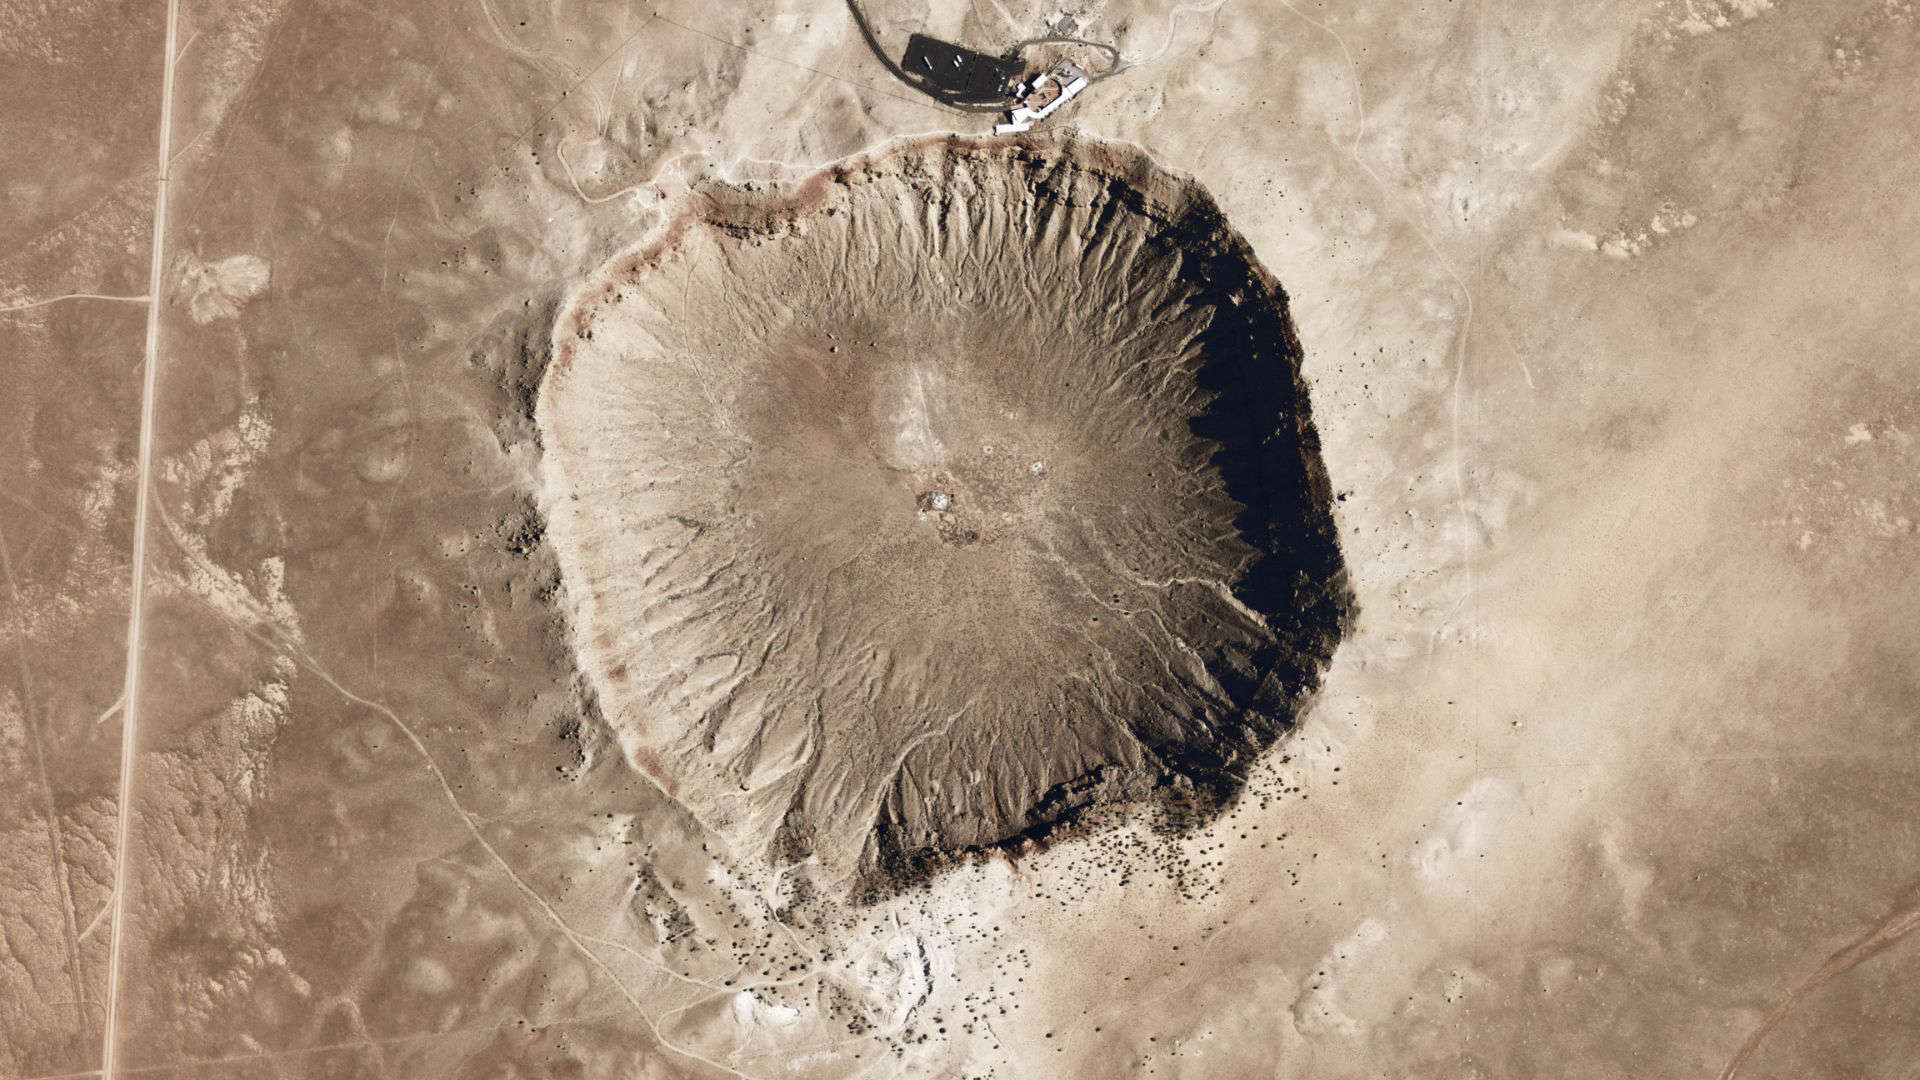 Enormous Crater 3x the Size of the Grand Canyon Discovered in U.S.